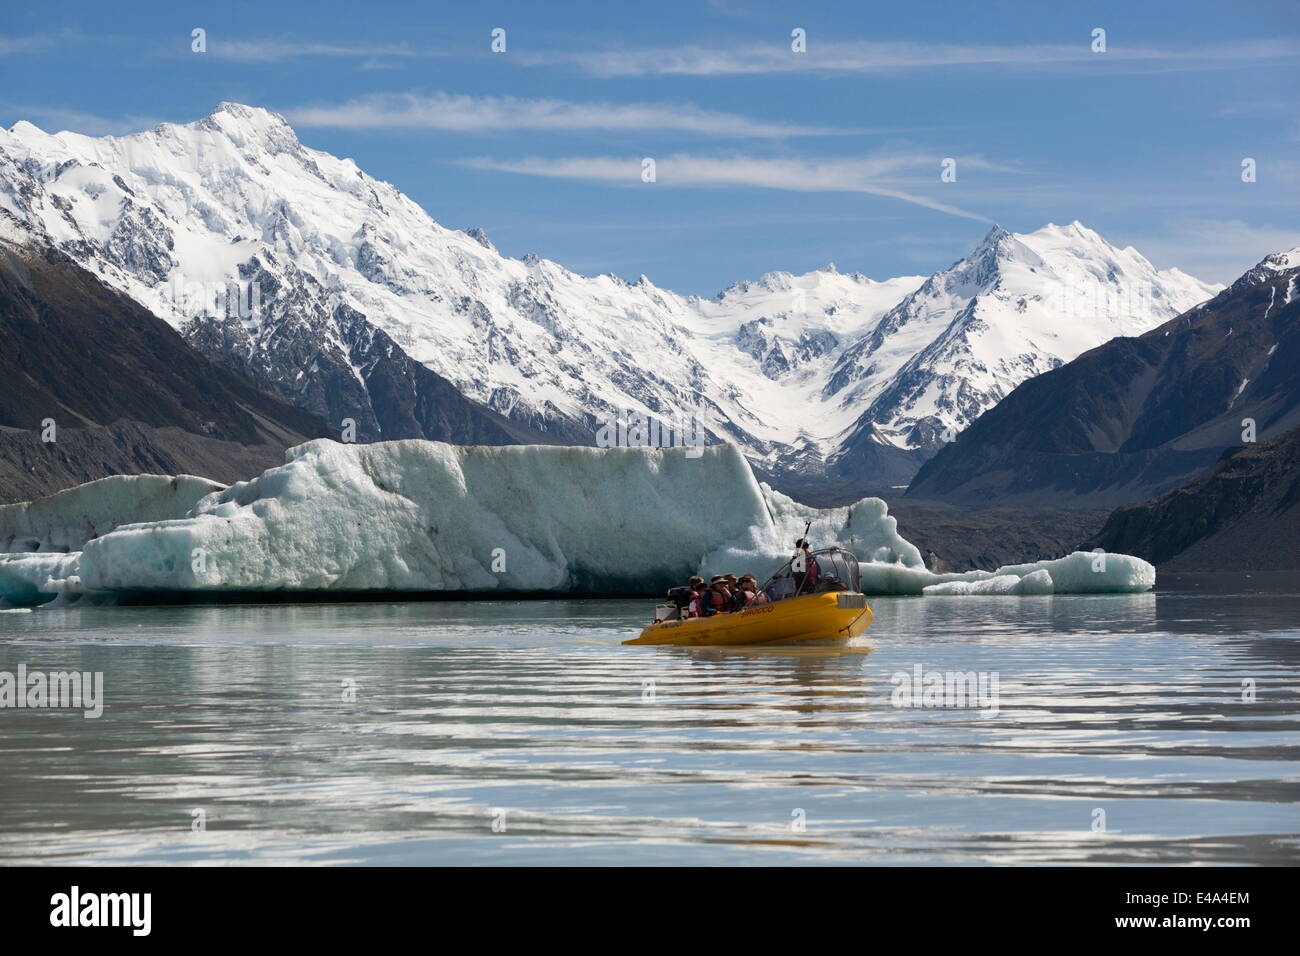 Boat tour with icebergs, Tasman Lake, Mount Cook National Park, UNESCO, Canterbury region, South Island, New Zealand, Pacific Stock Photo